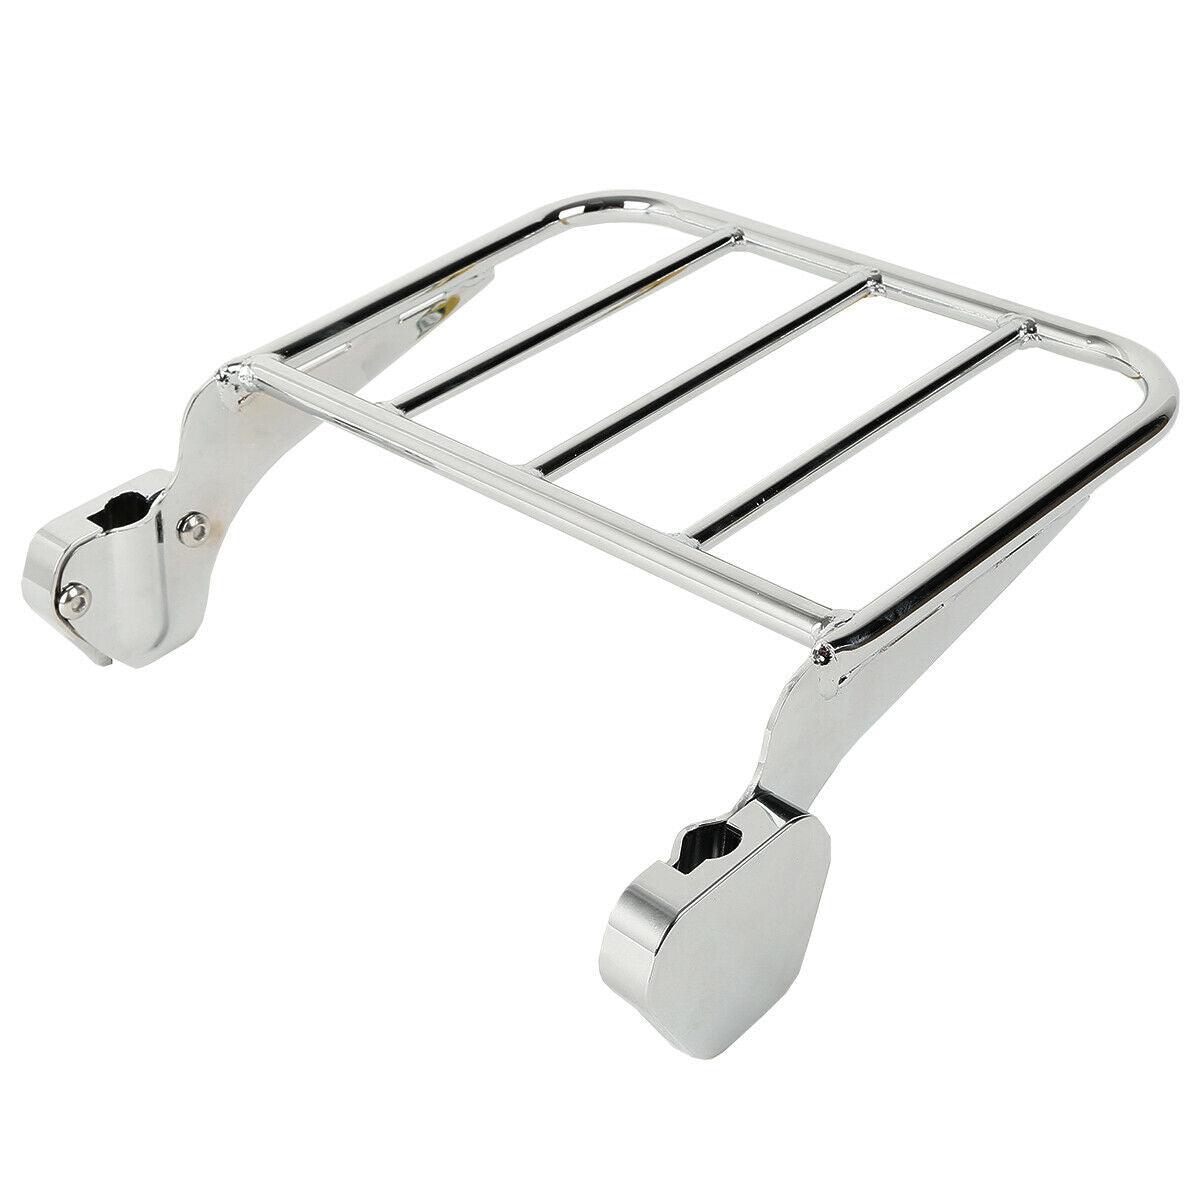 Luggage Rack Fit For Harley Touring Road King Street Glide 1997-2008 2007 Chrome - Moto Life Products